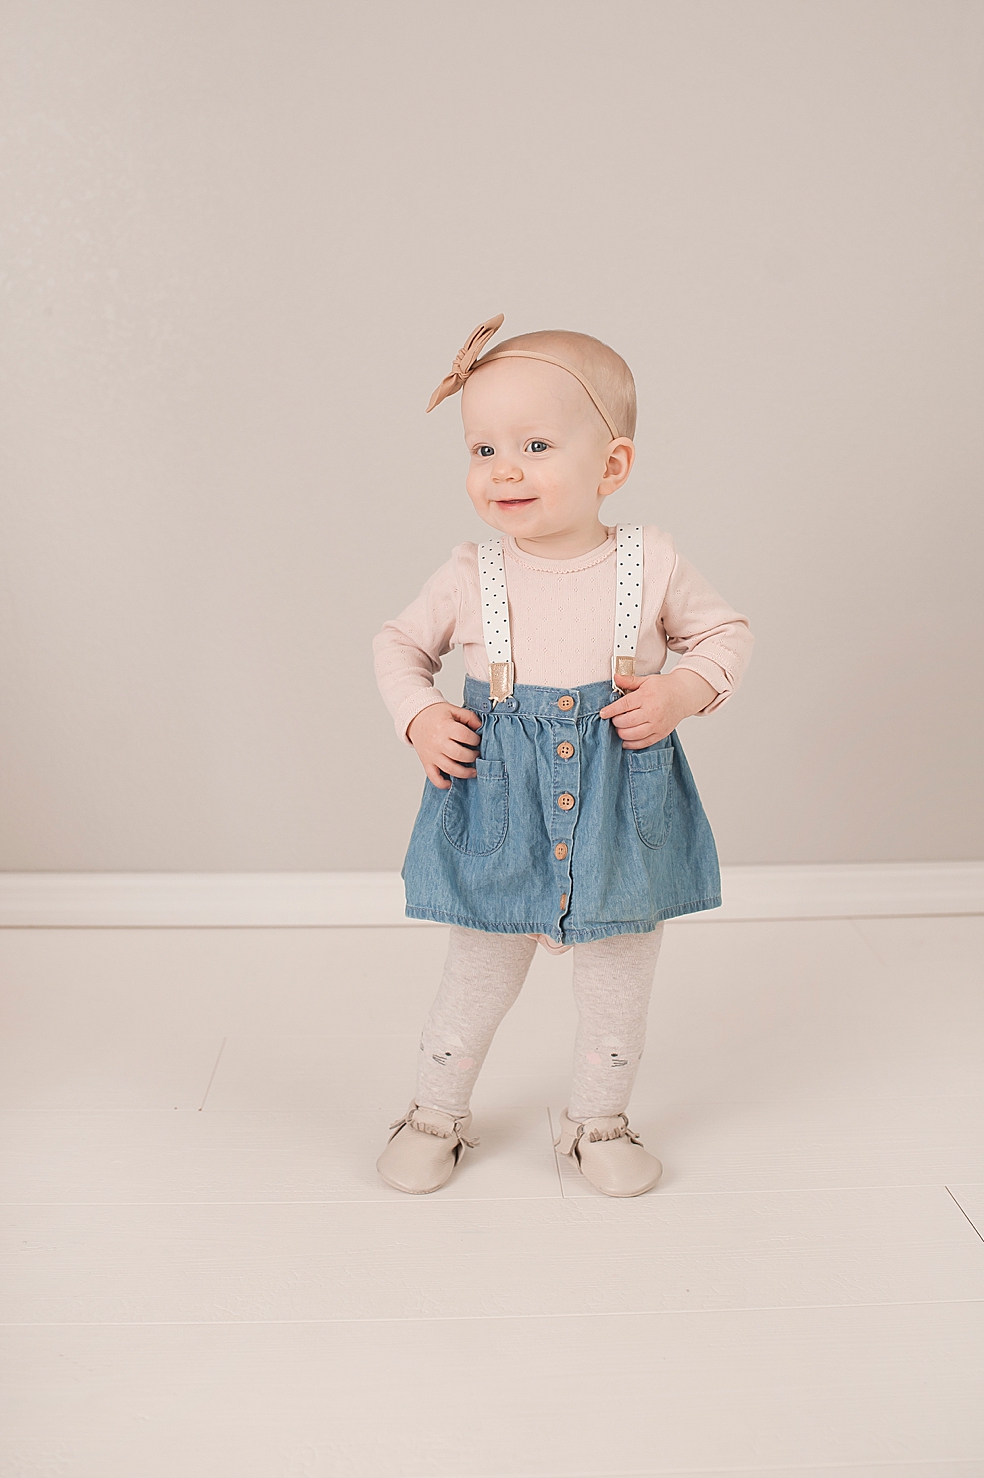 Toddler baby girl standing on her own | Photo by Decatur Alabama Baby Photographer Jessica Lee 